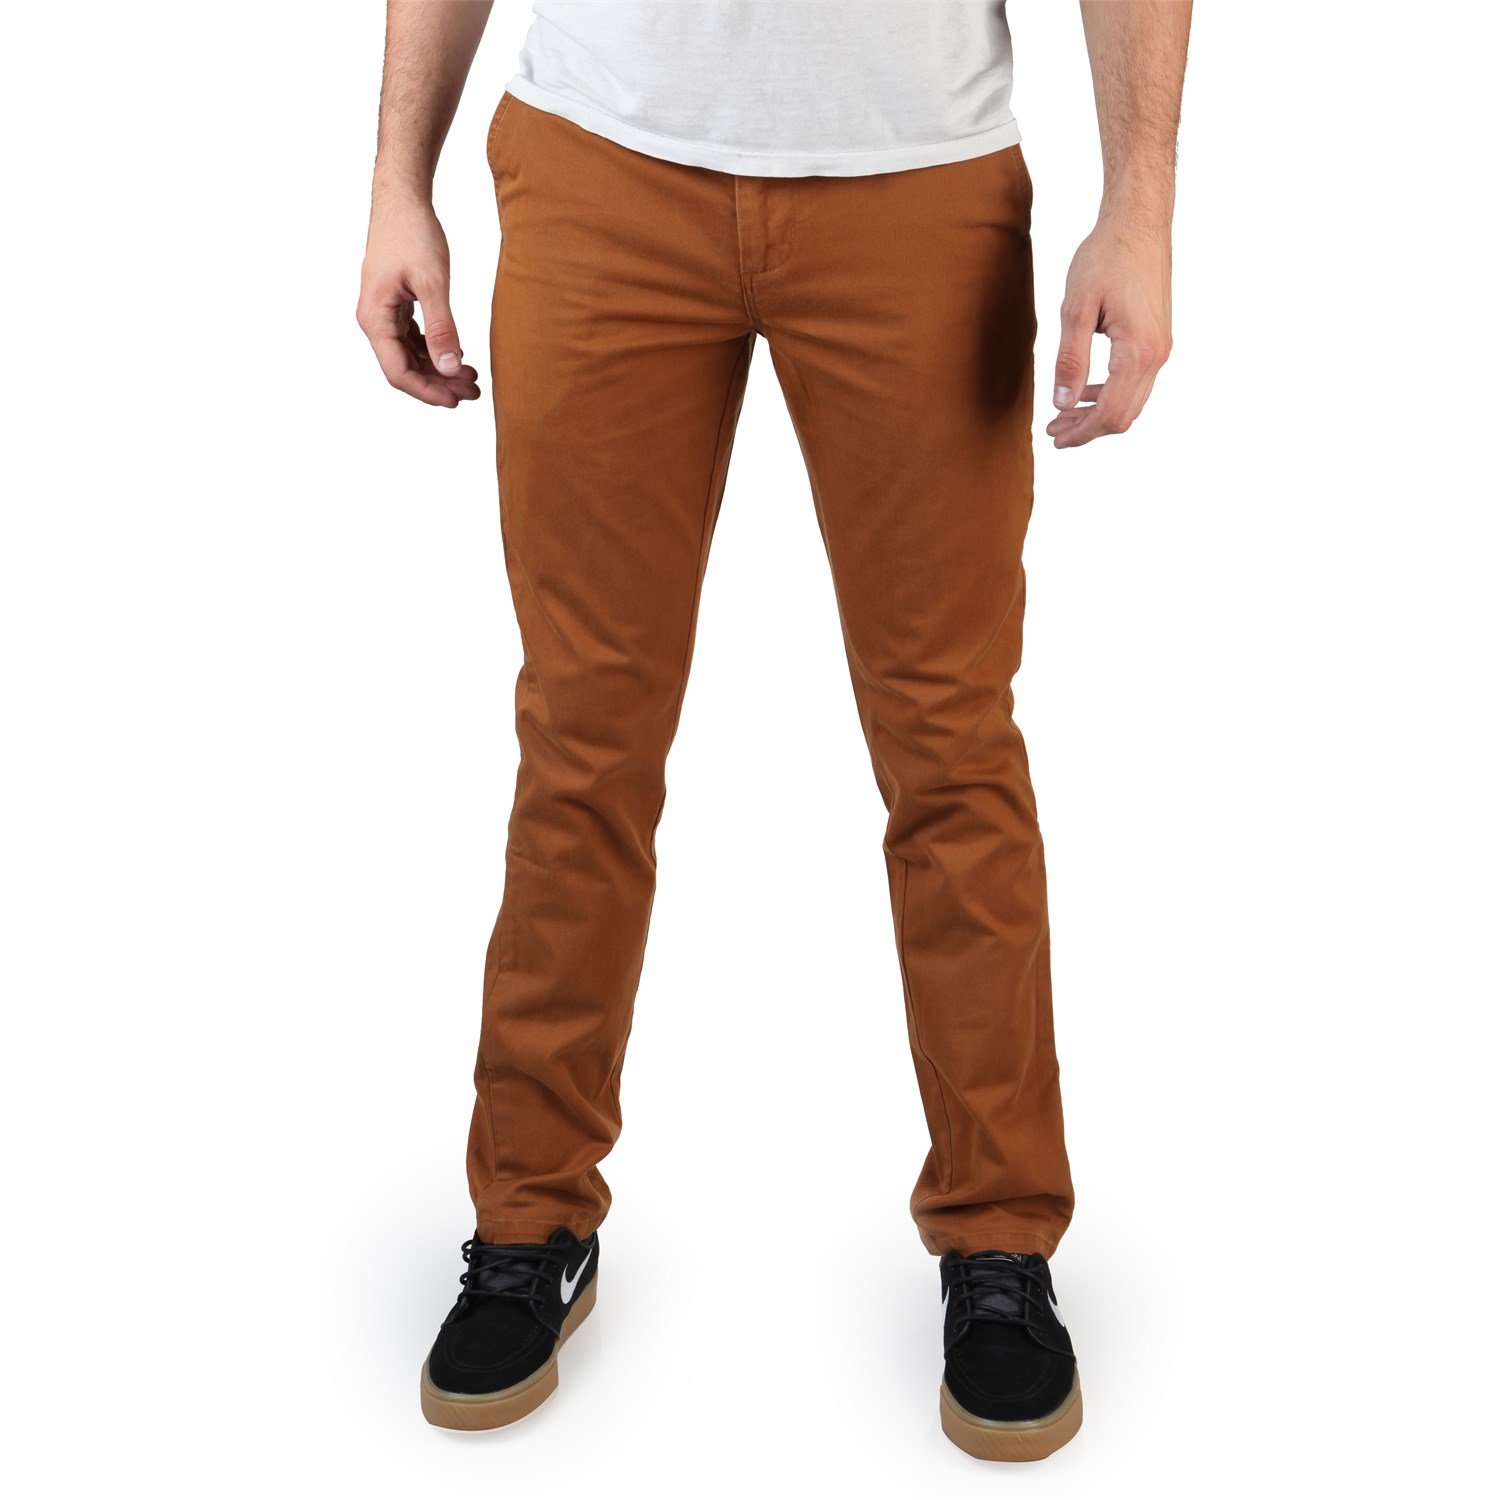 Obey Casual Trousers  Buy Obey Hughes Twill Pant Online  Nykaa Fashion